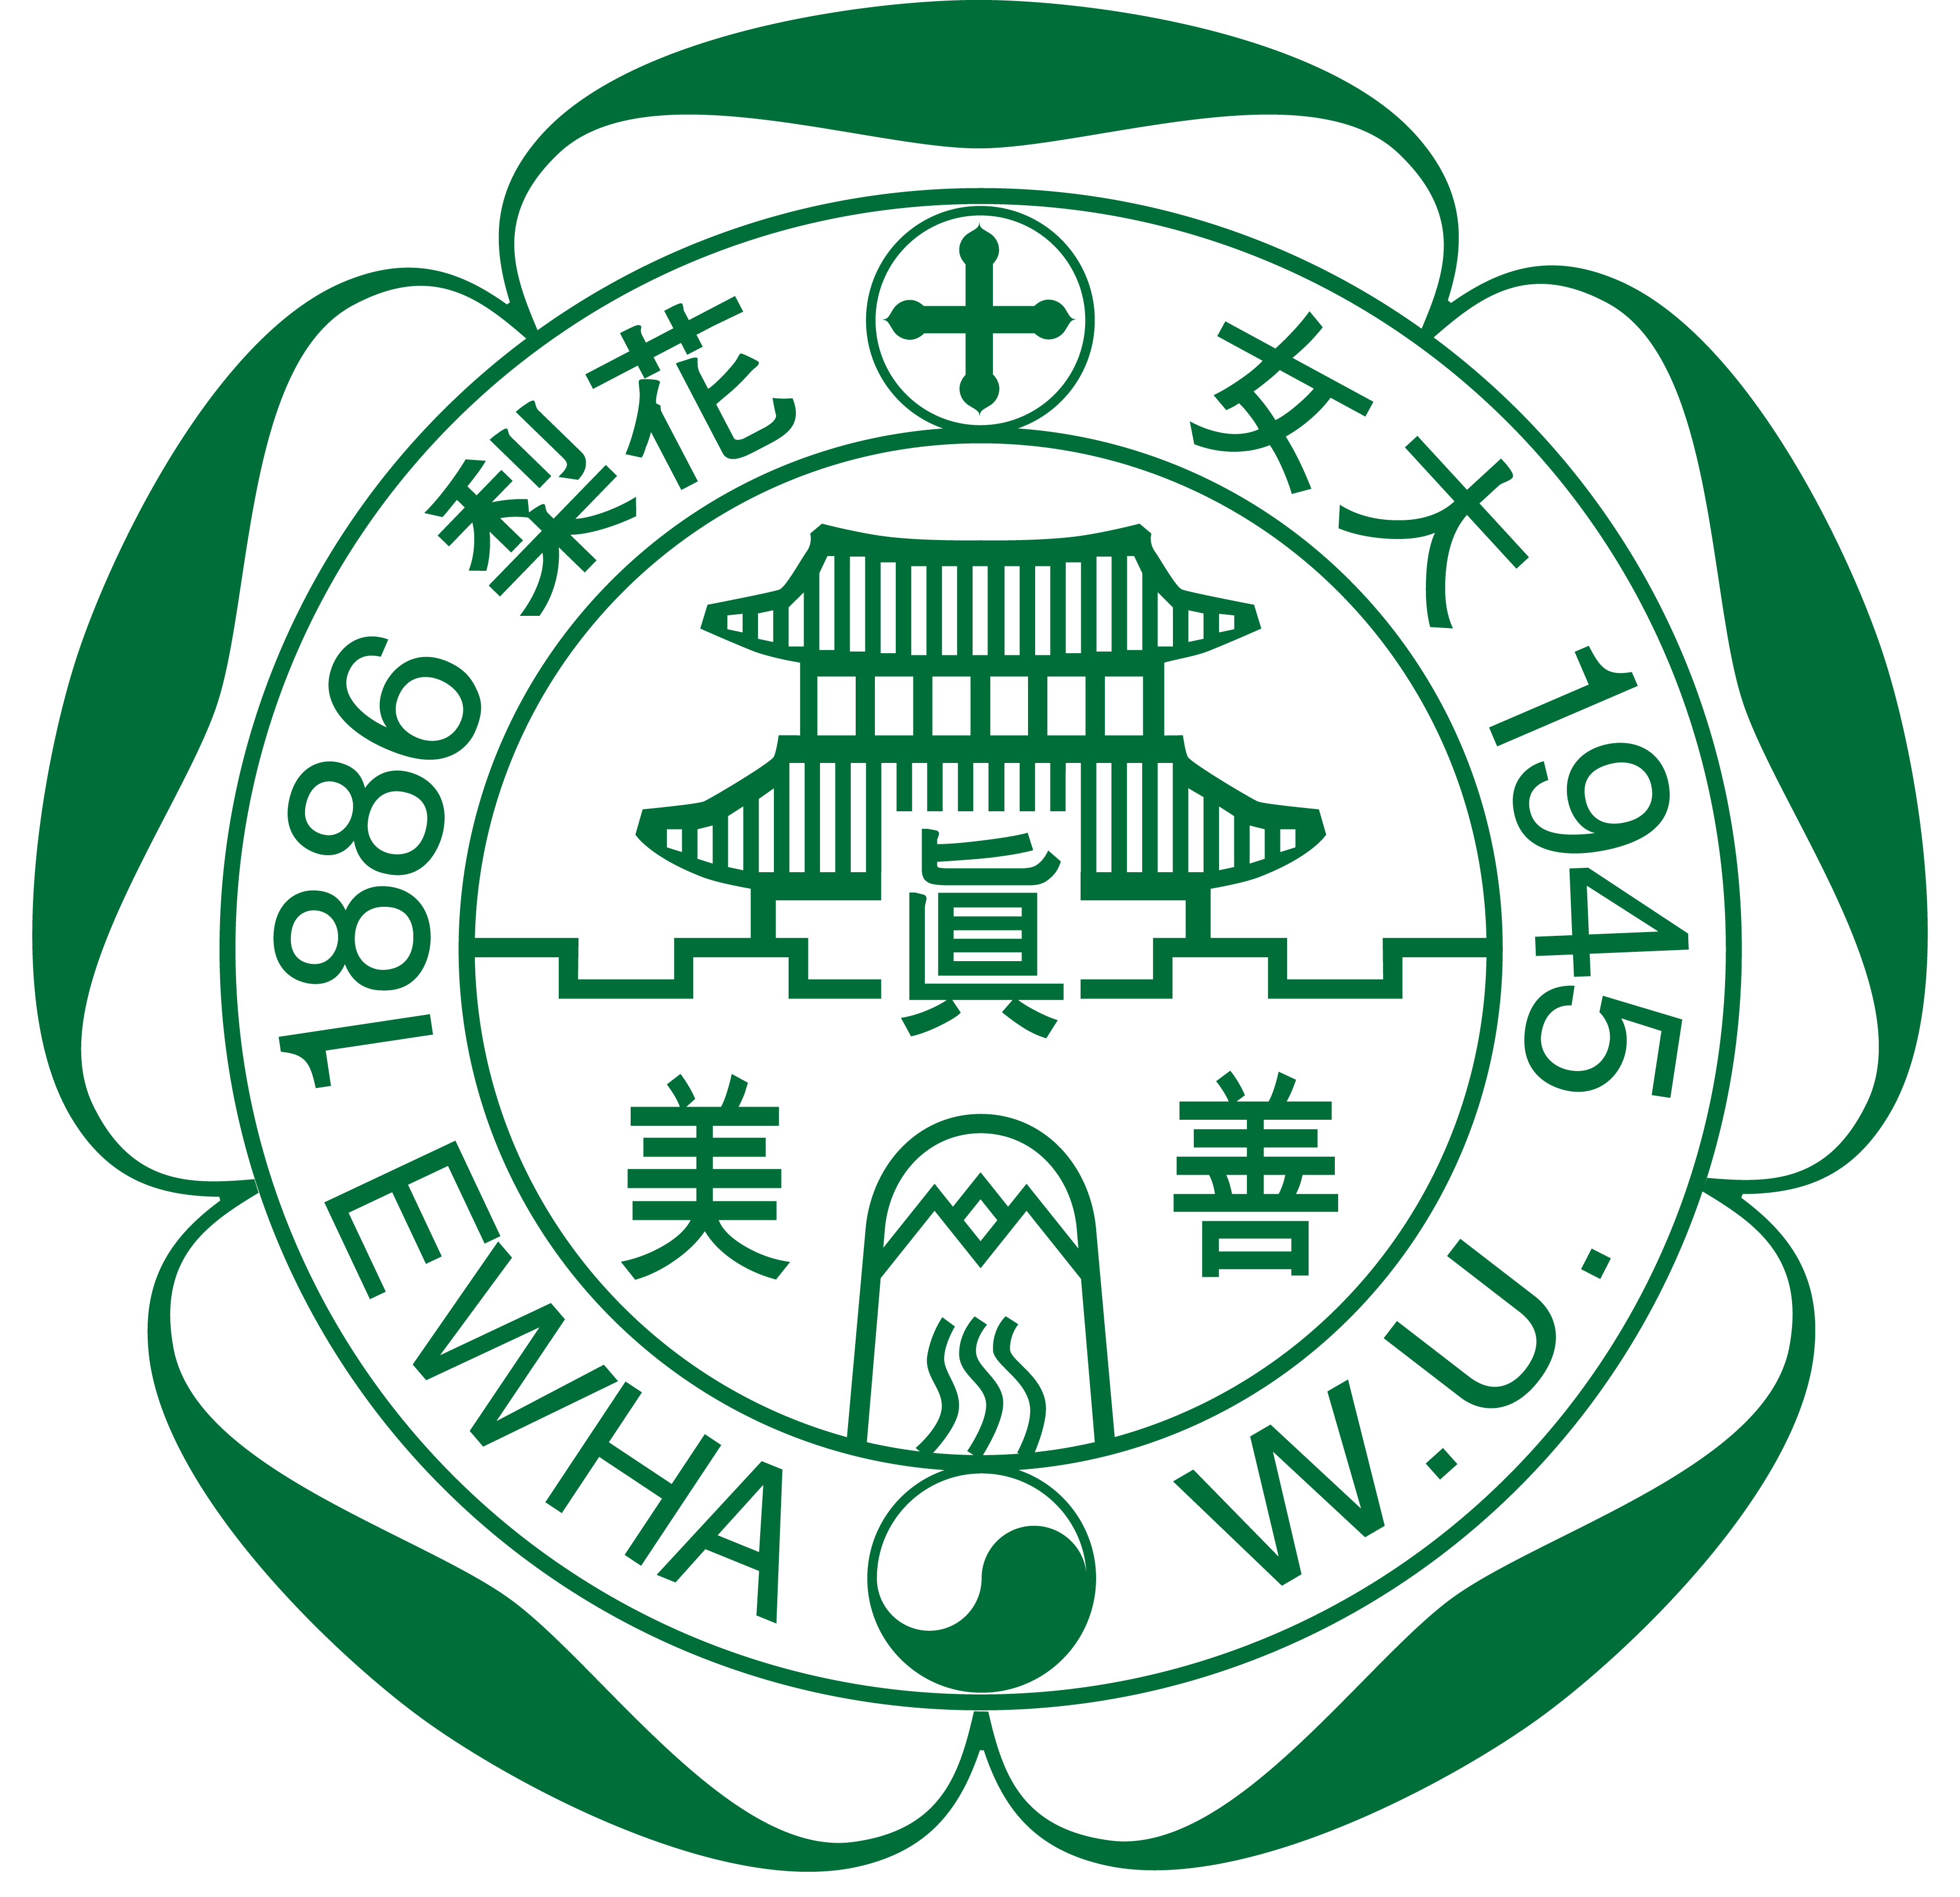 Ewha Womans University Foreign Student Admission Required Documents_English Version 이화여대 외국인전형 제출서류_영어본_00.png